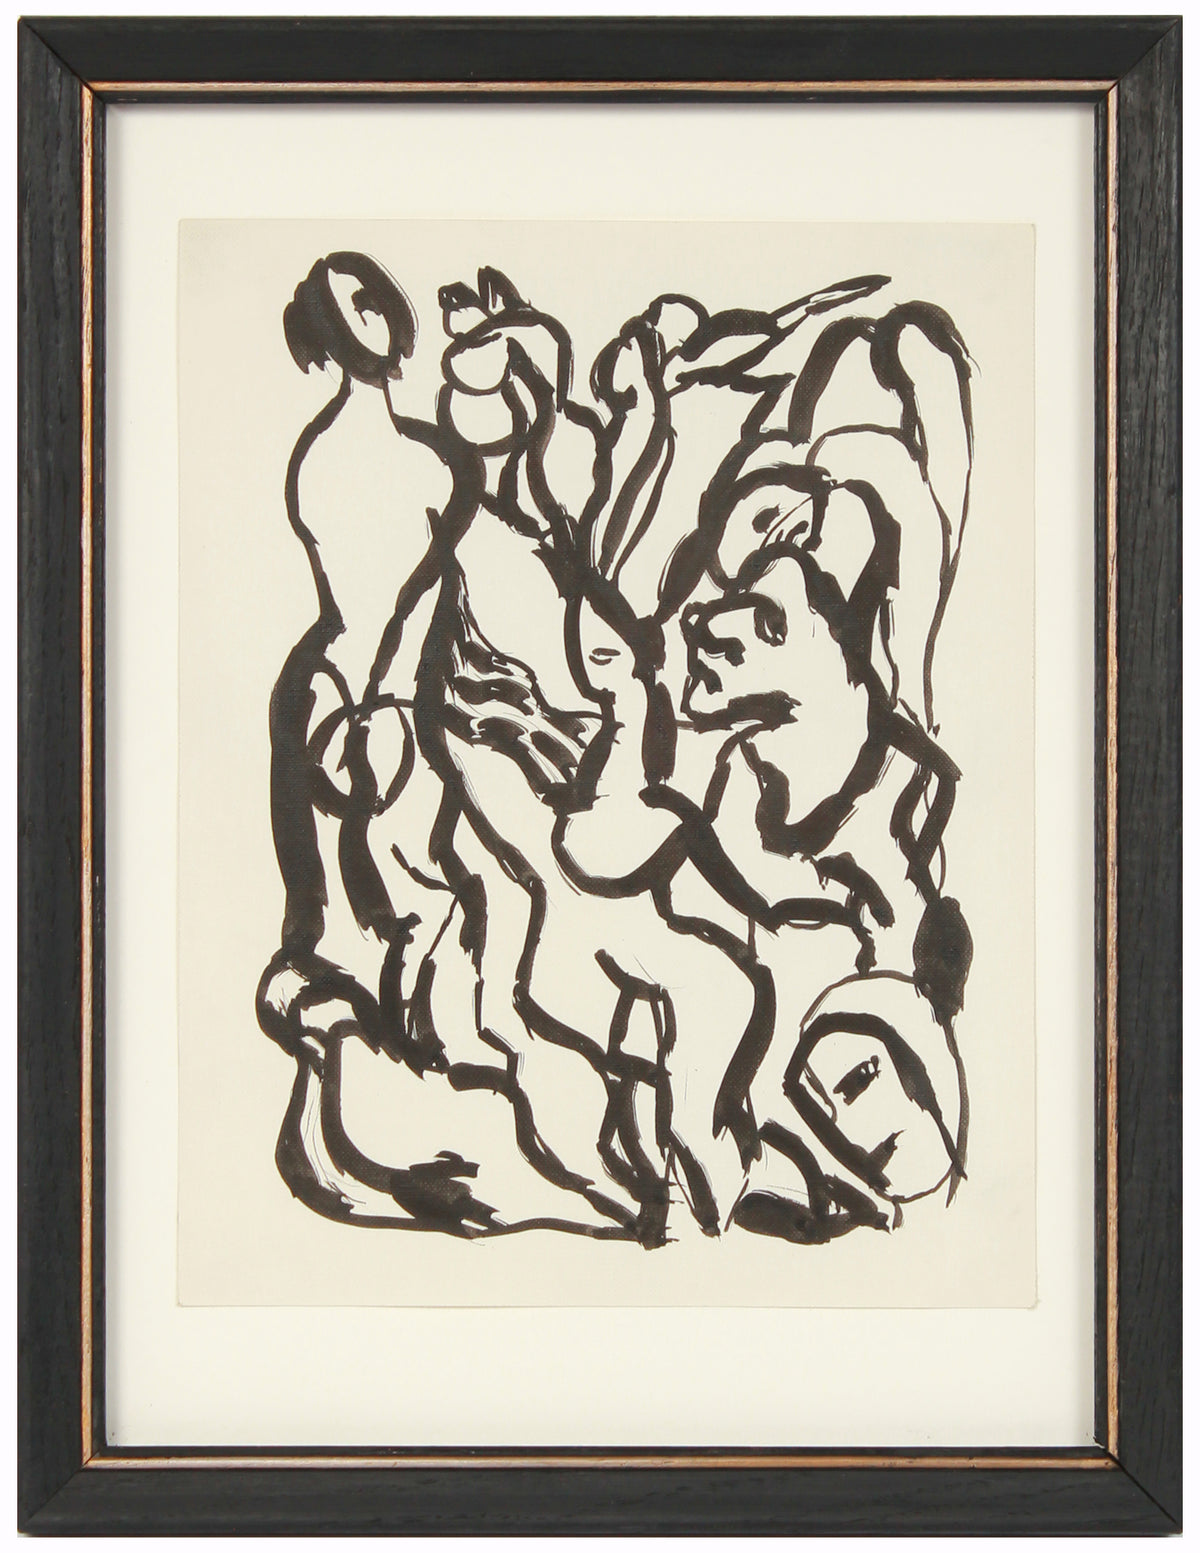 Bold Modernist Abstracted Figures &lt;br&gt;Early-Mid 20th Century Ink &lt;br&gt;&lt;br&gt;#13522